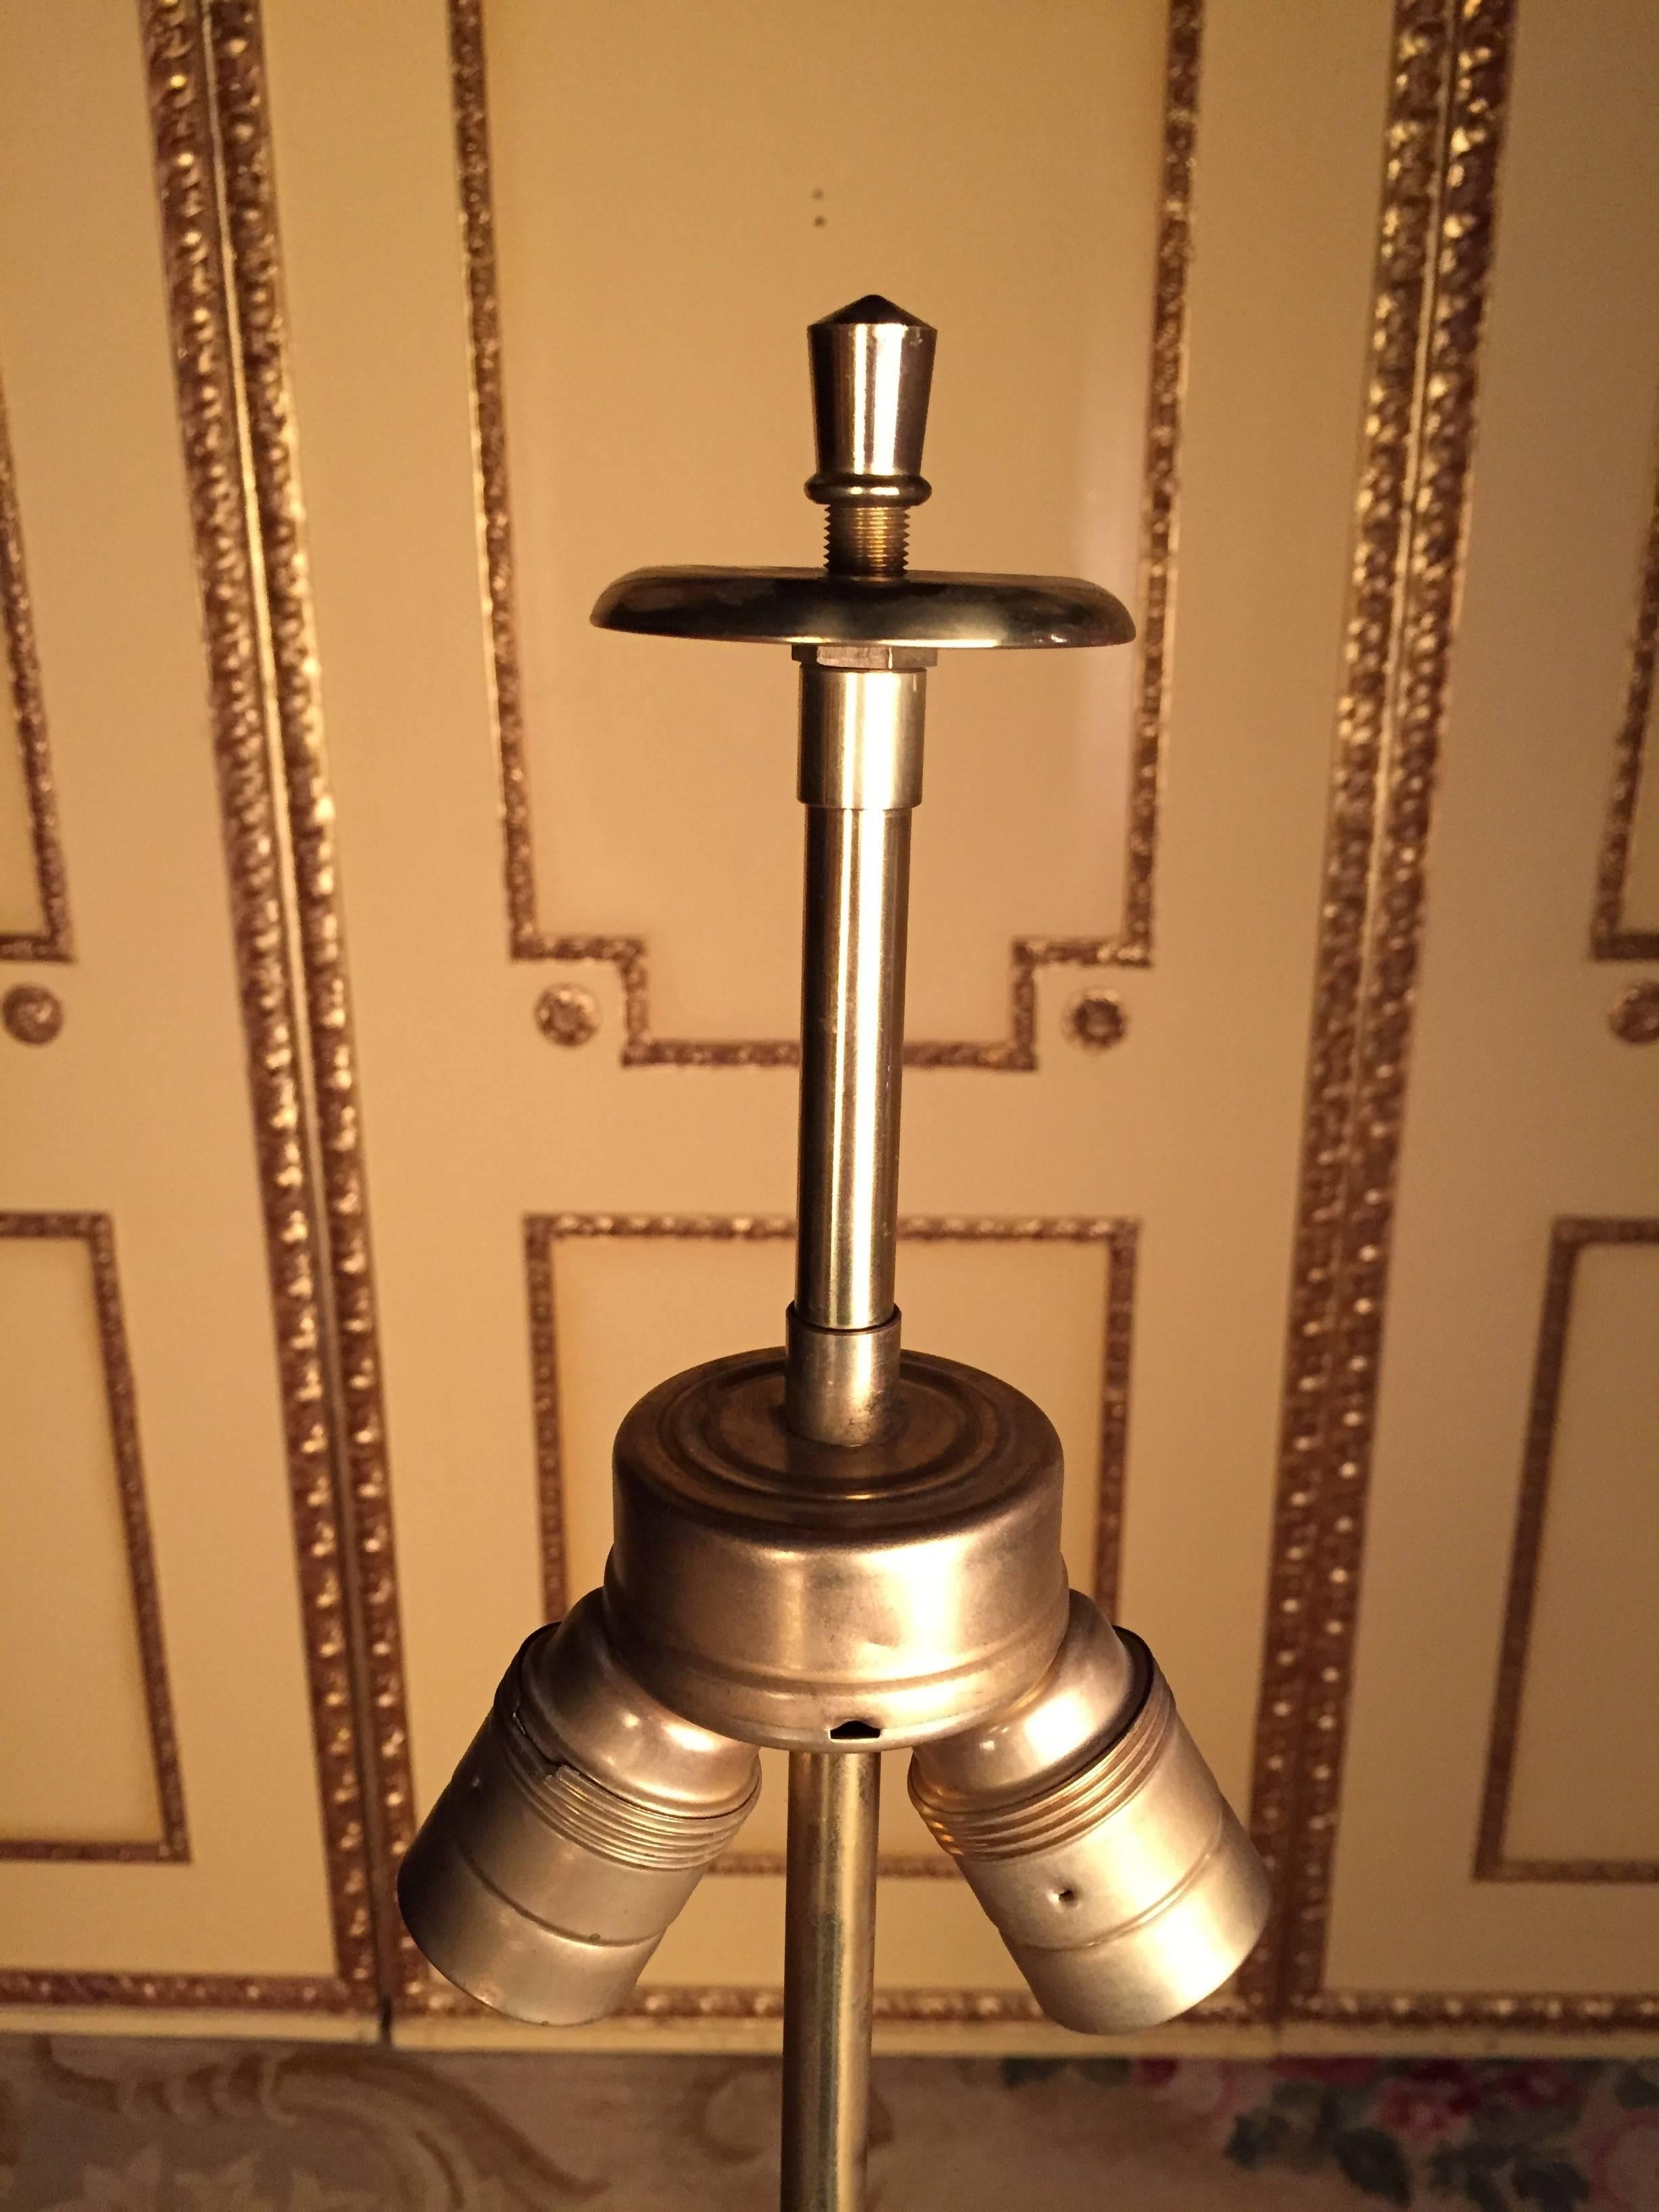 Monumental KPM Berlin lamp. Electrified with four lights. Bottom edge with brass,
circa 1960s.